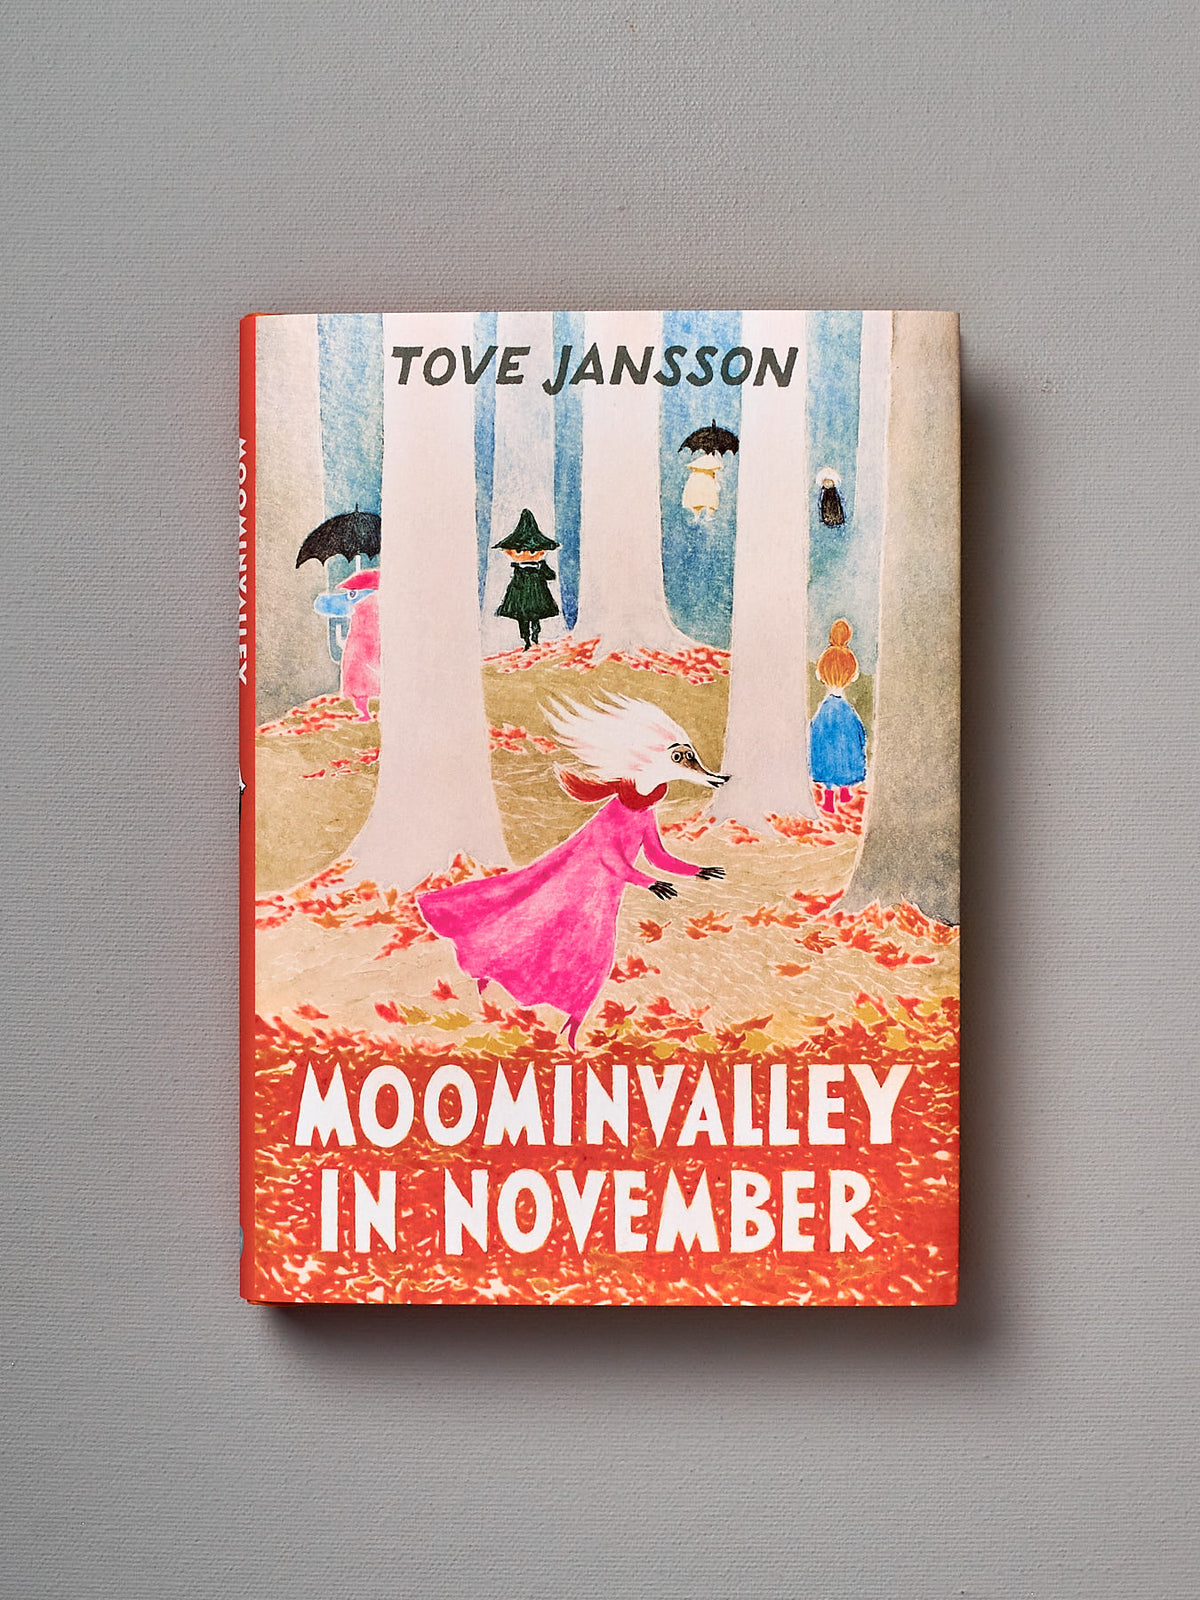 Moominvalley in November by Tove Jansson.